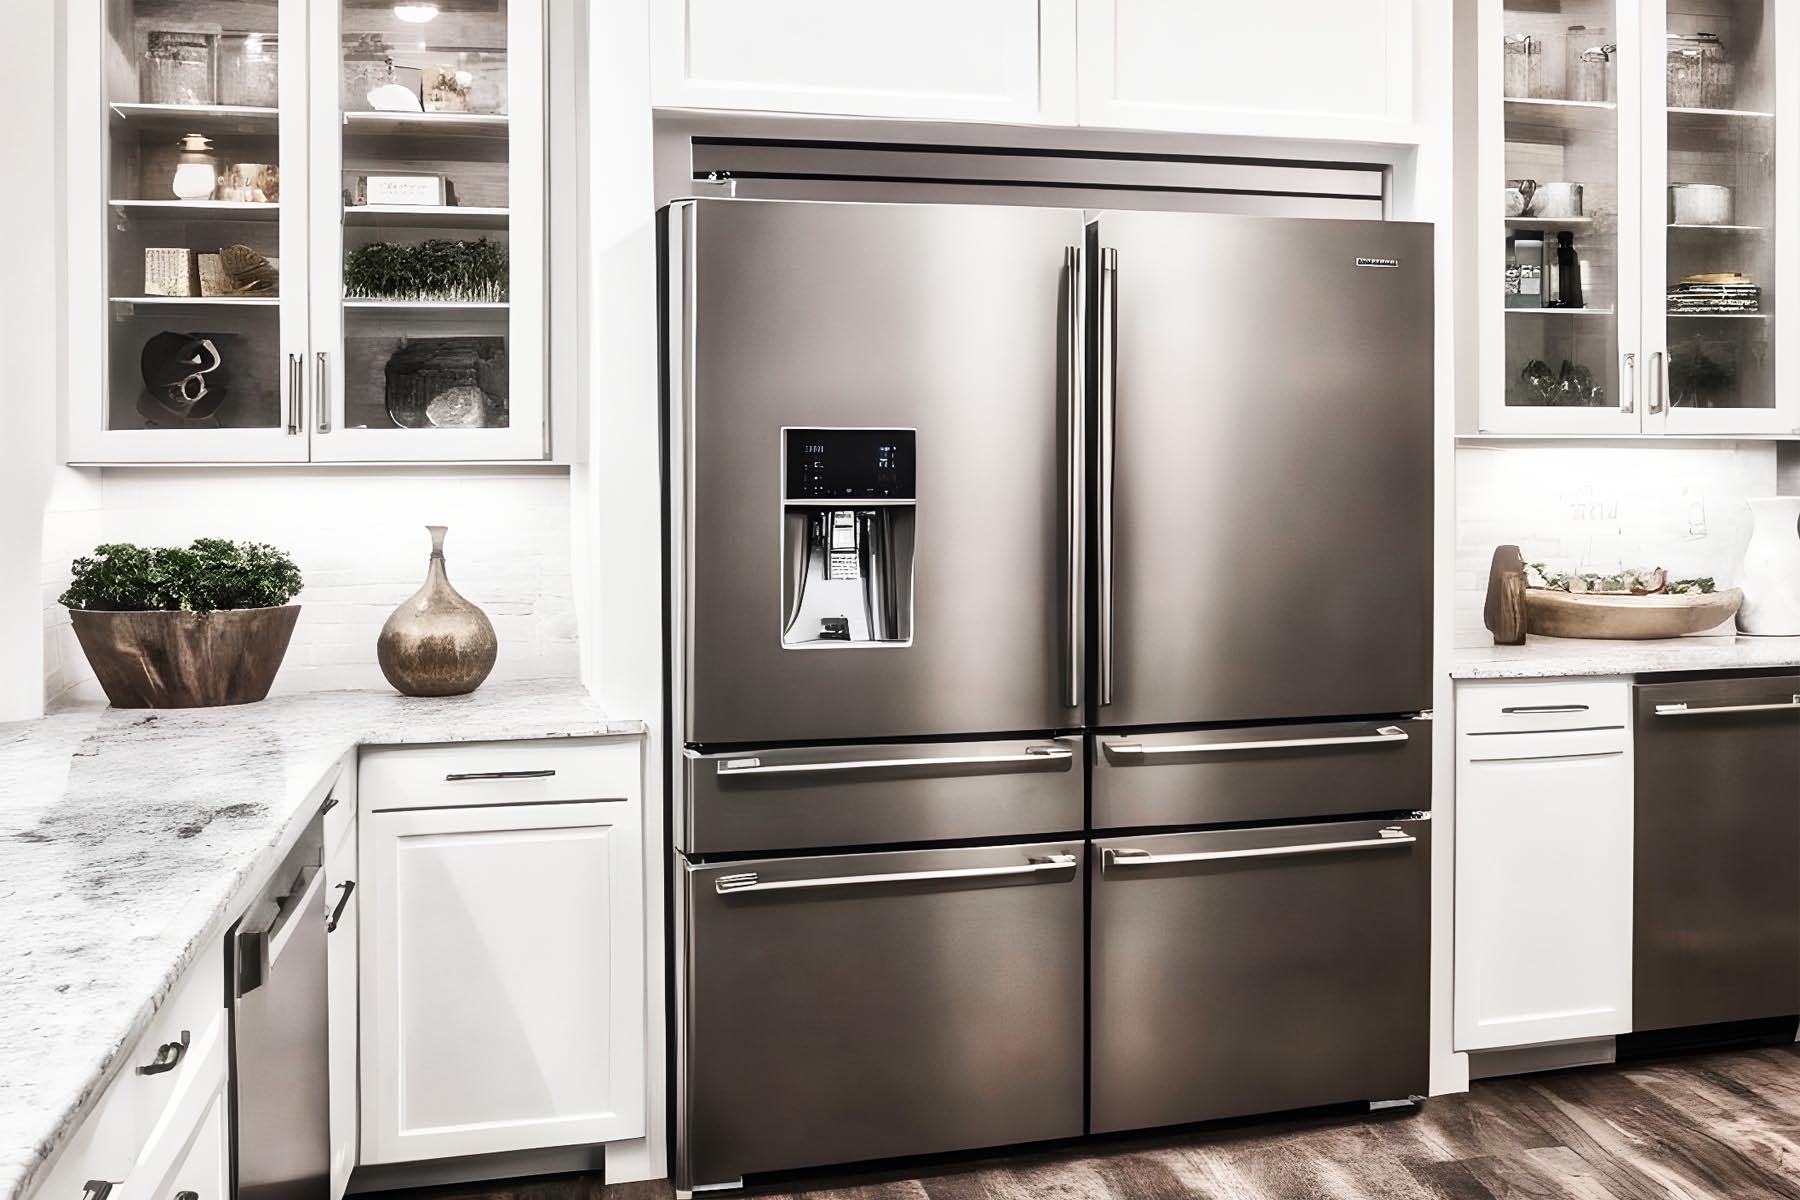 Authorized Refrigerator Repair Services in Liberty Hill, Texas